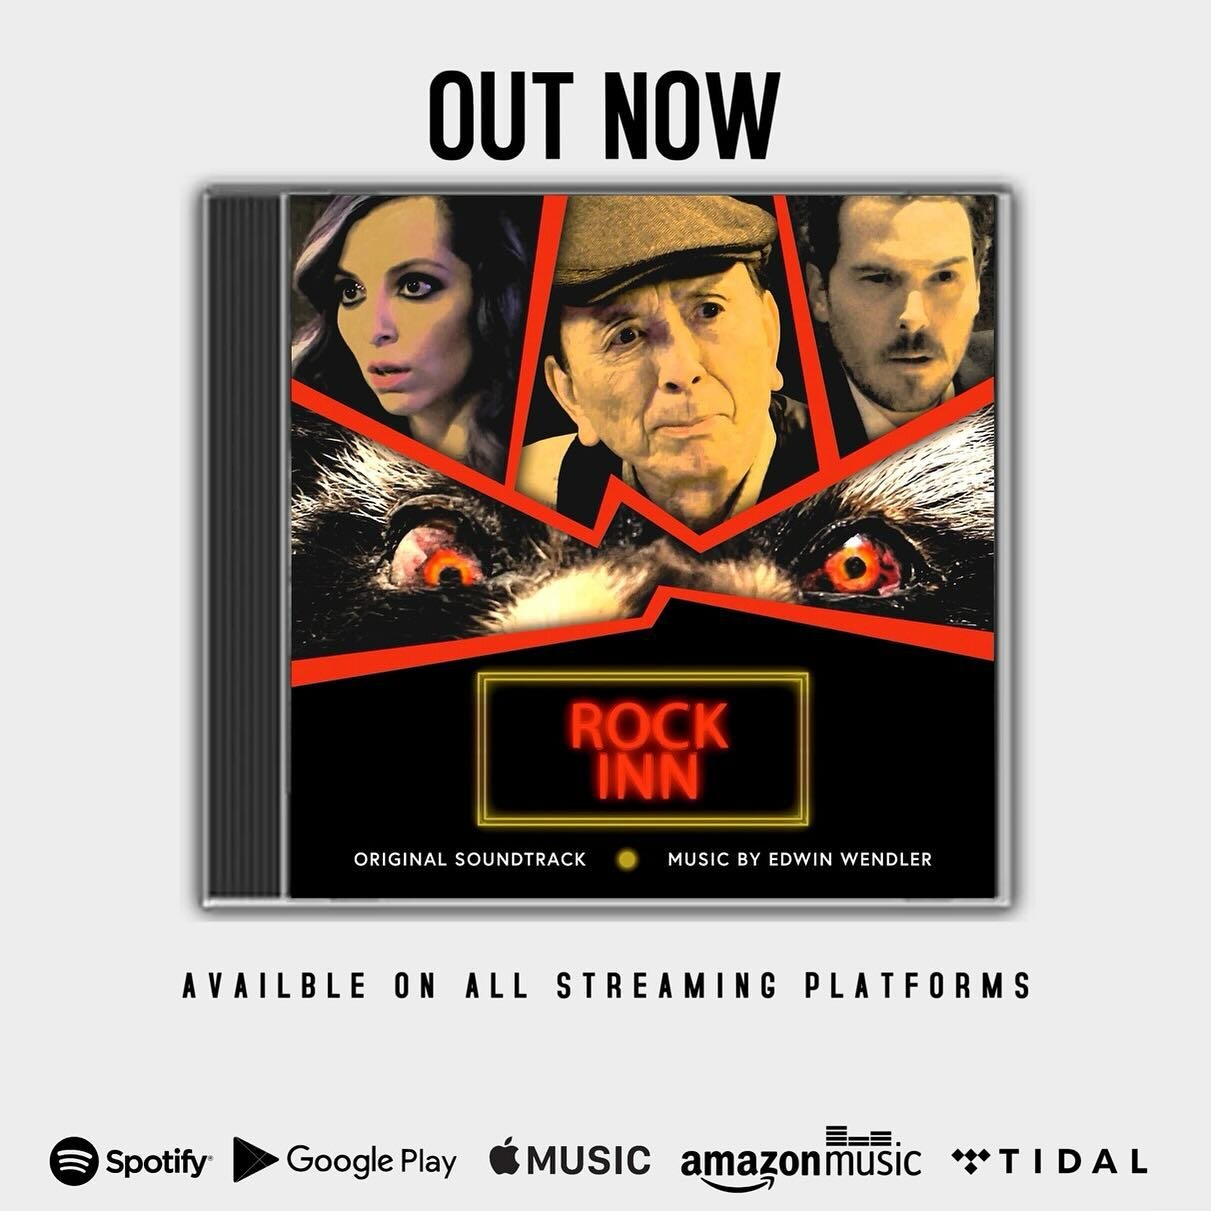 Now streaming on all the major platforms, the soundtrack from ROCK INN composed by our client, @edwinwendler! This fun horror/comedy film stars the legendary James Hong (EVERYTHING EVERYWHERE ALL AT ONCE) and was directed by special effects master, F